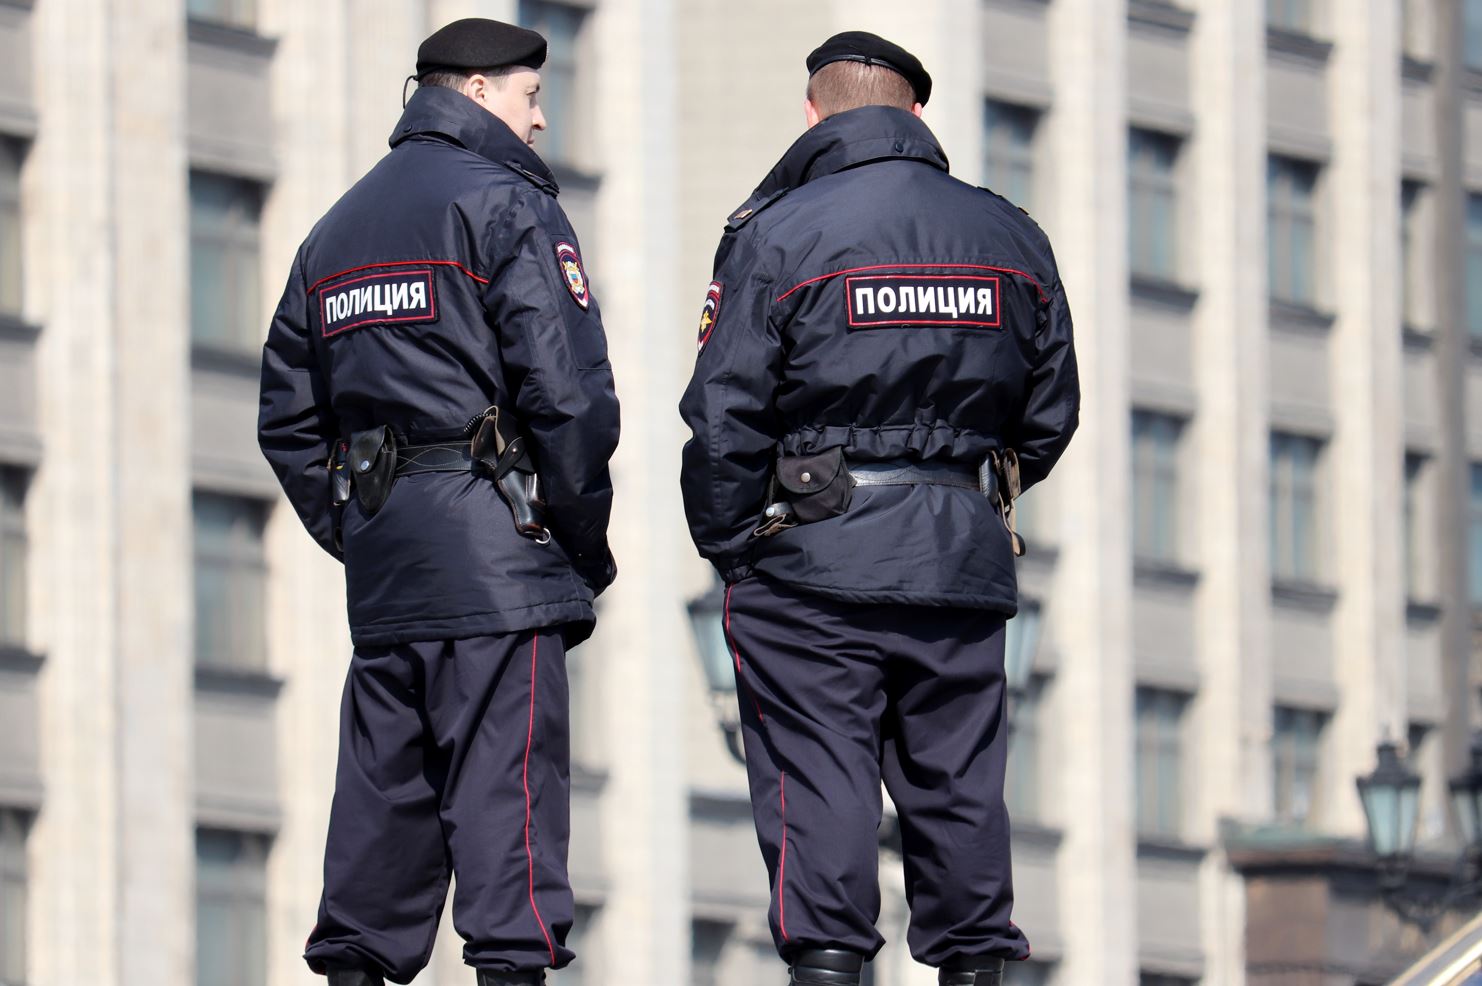 Russian police officers are really tall